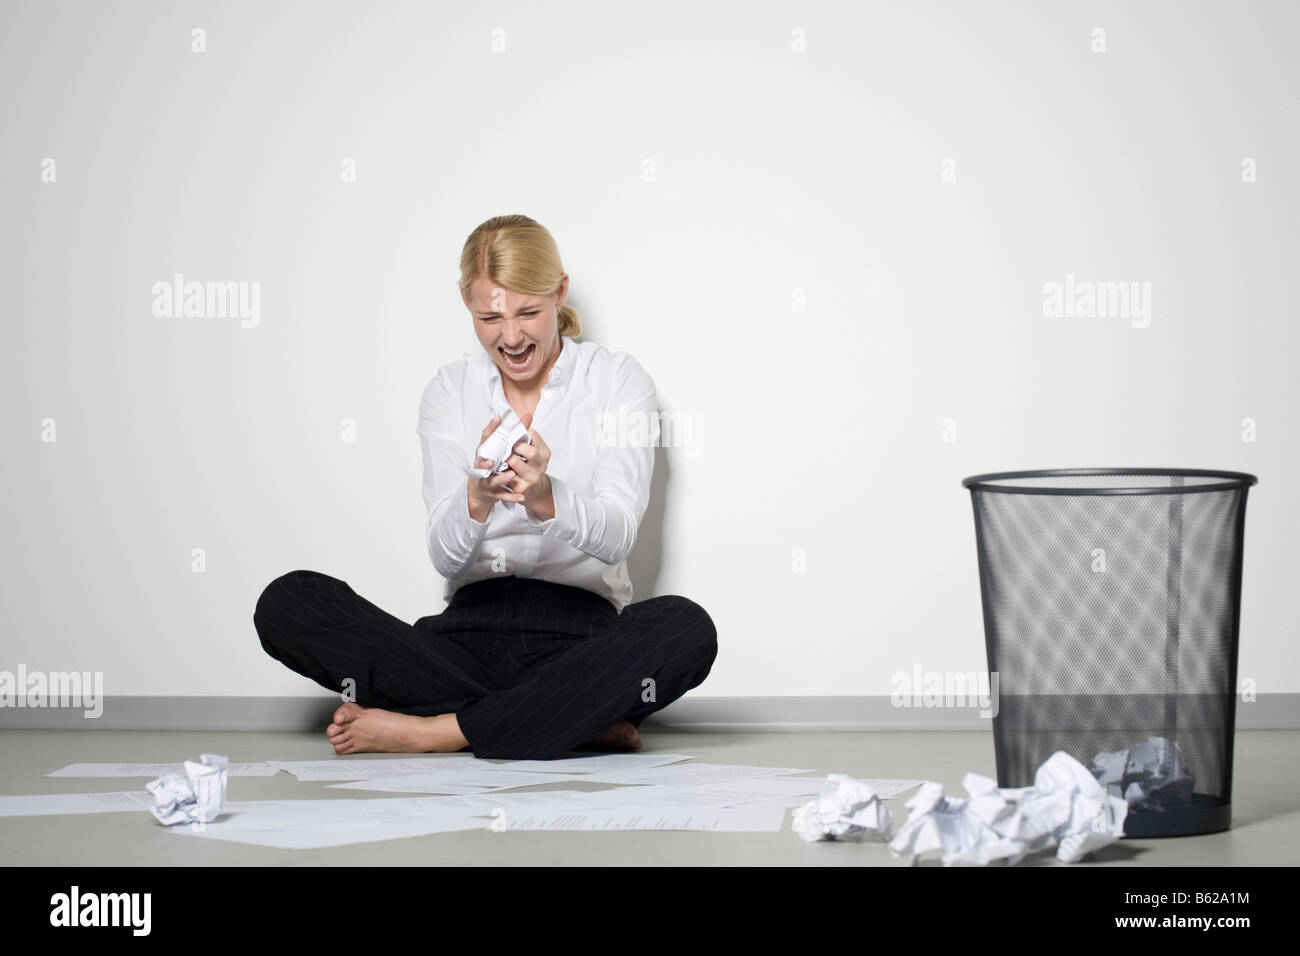 Young blonde woman sitting by the wall in despair amongst crumpled paper Stock Photo